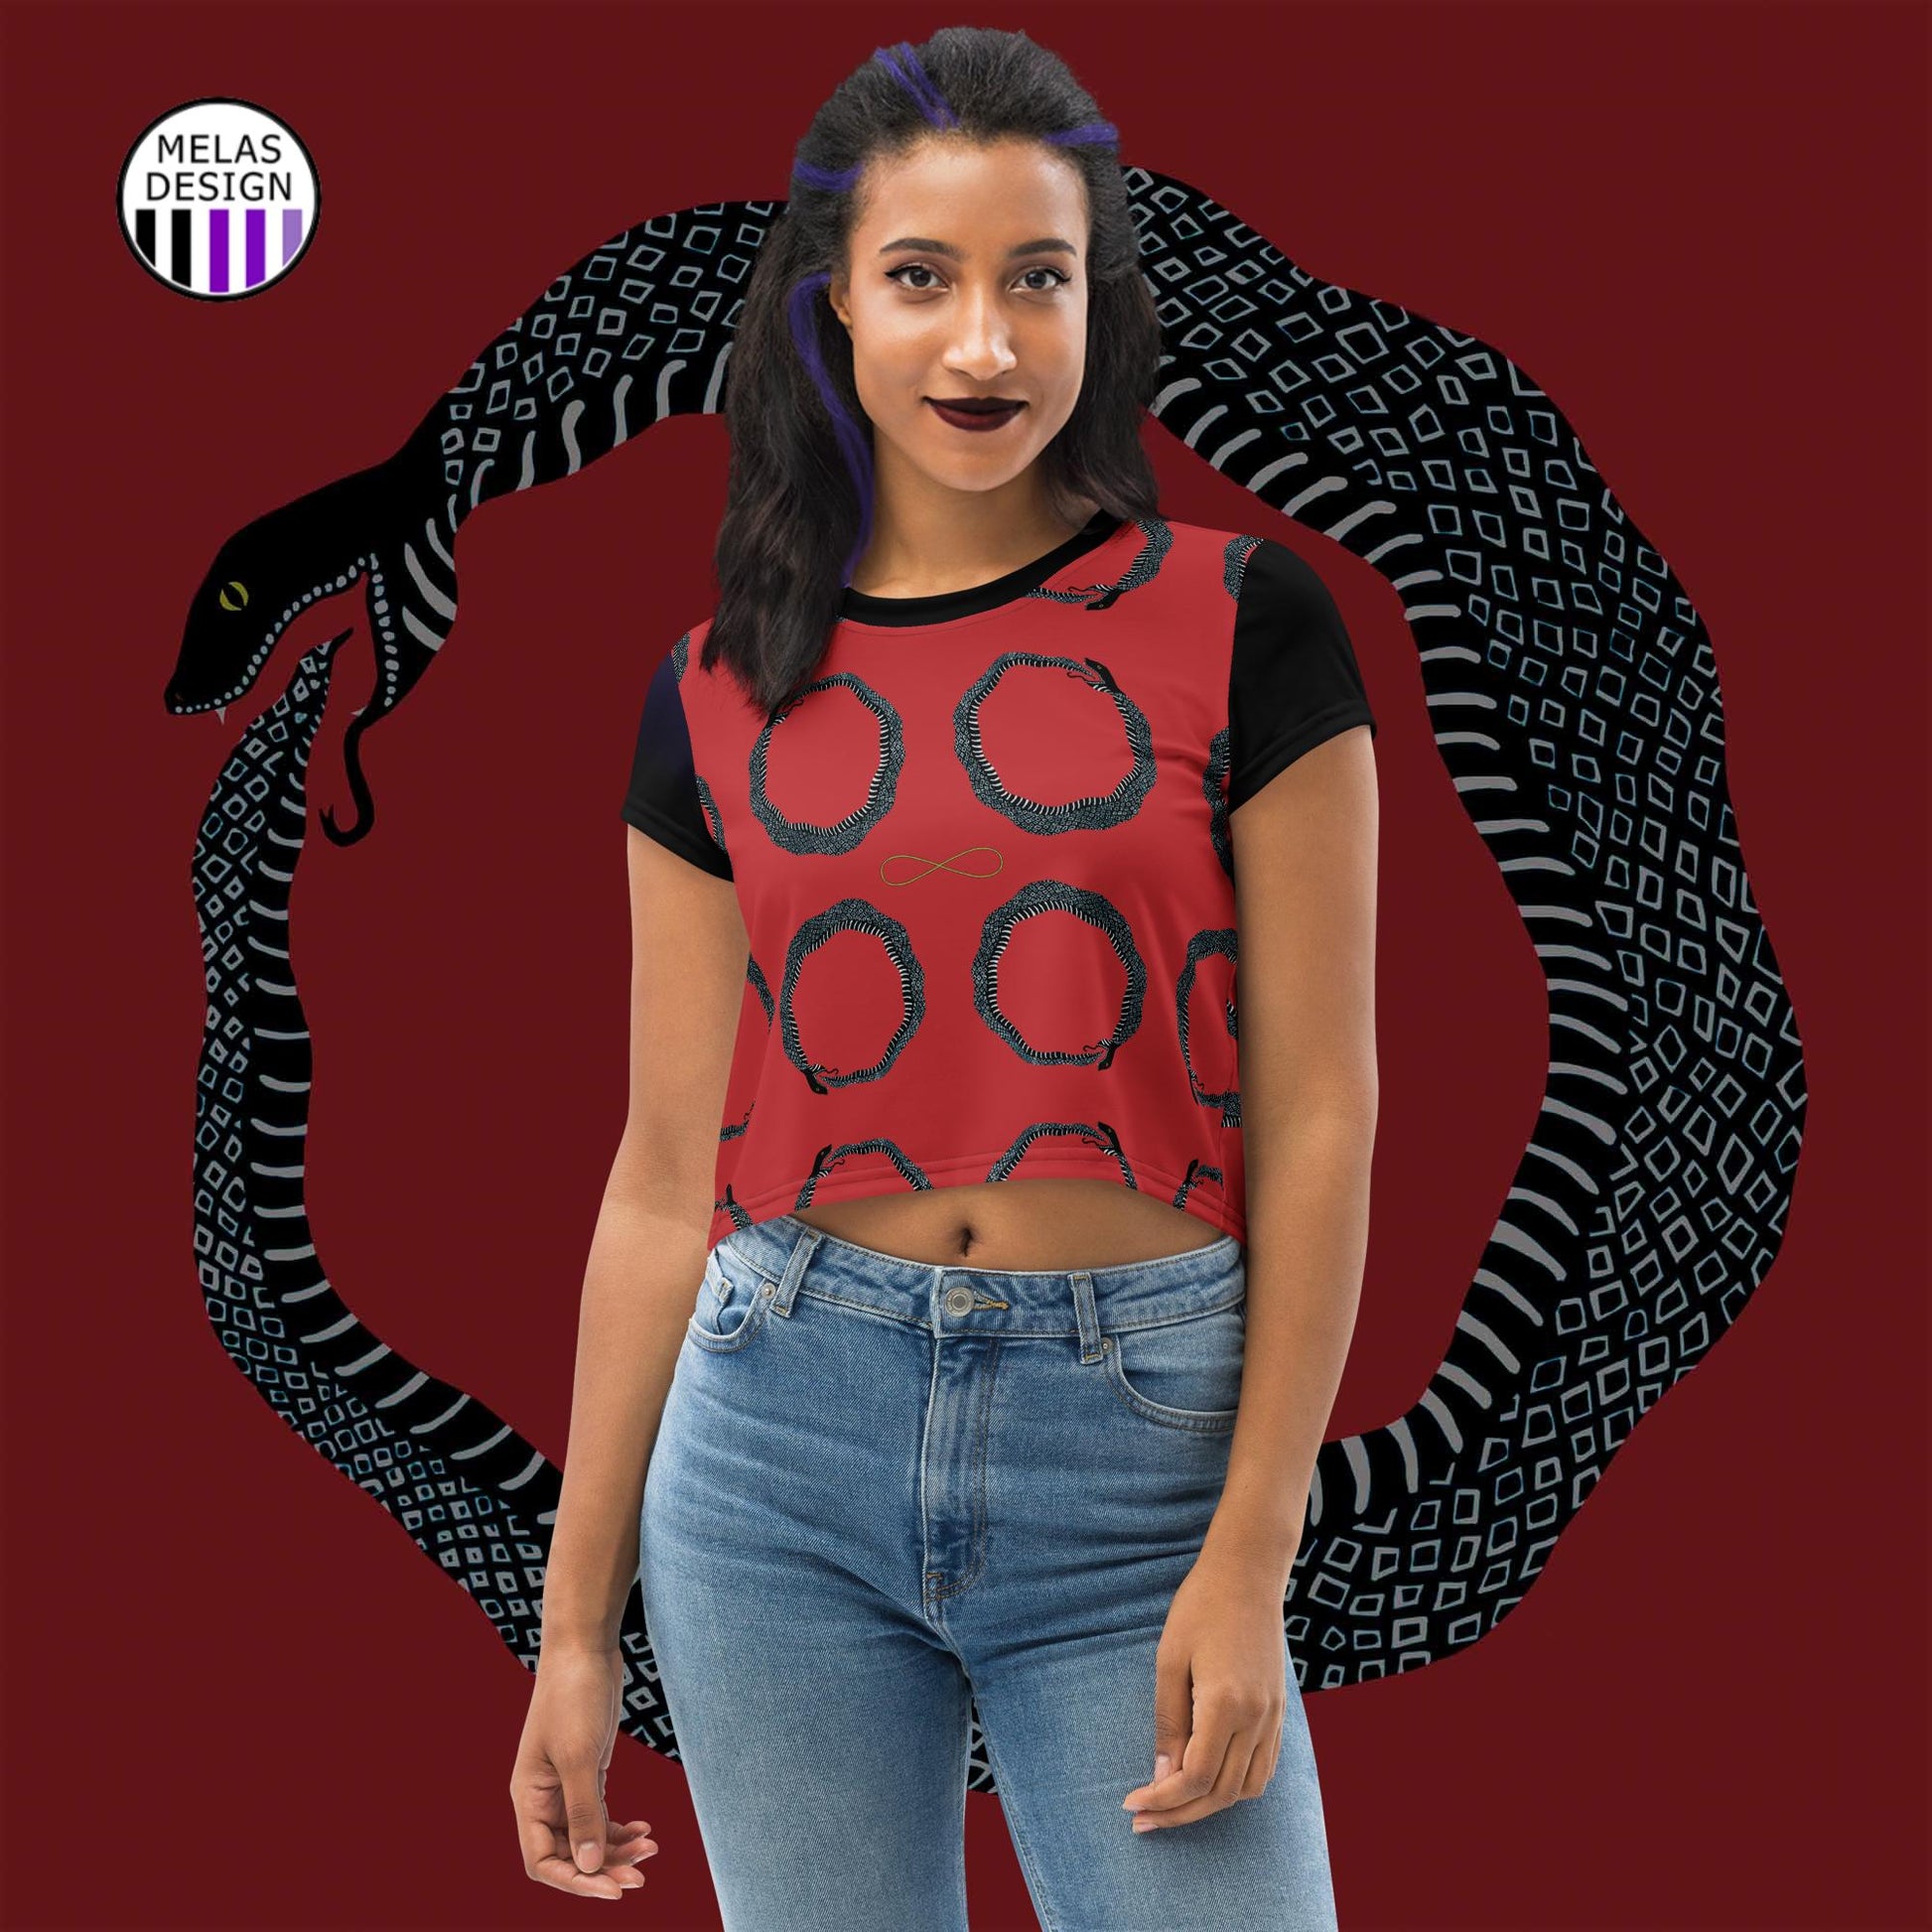 Ouroboros Infinity Crop Tee; Melasdesign; Witchy Gothic Clothes Collection; crop top; crop tops; allover print; womens; plus size; regular size; goth; witch aesthetic; style; fashion; Thomas WV